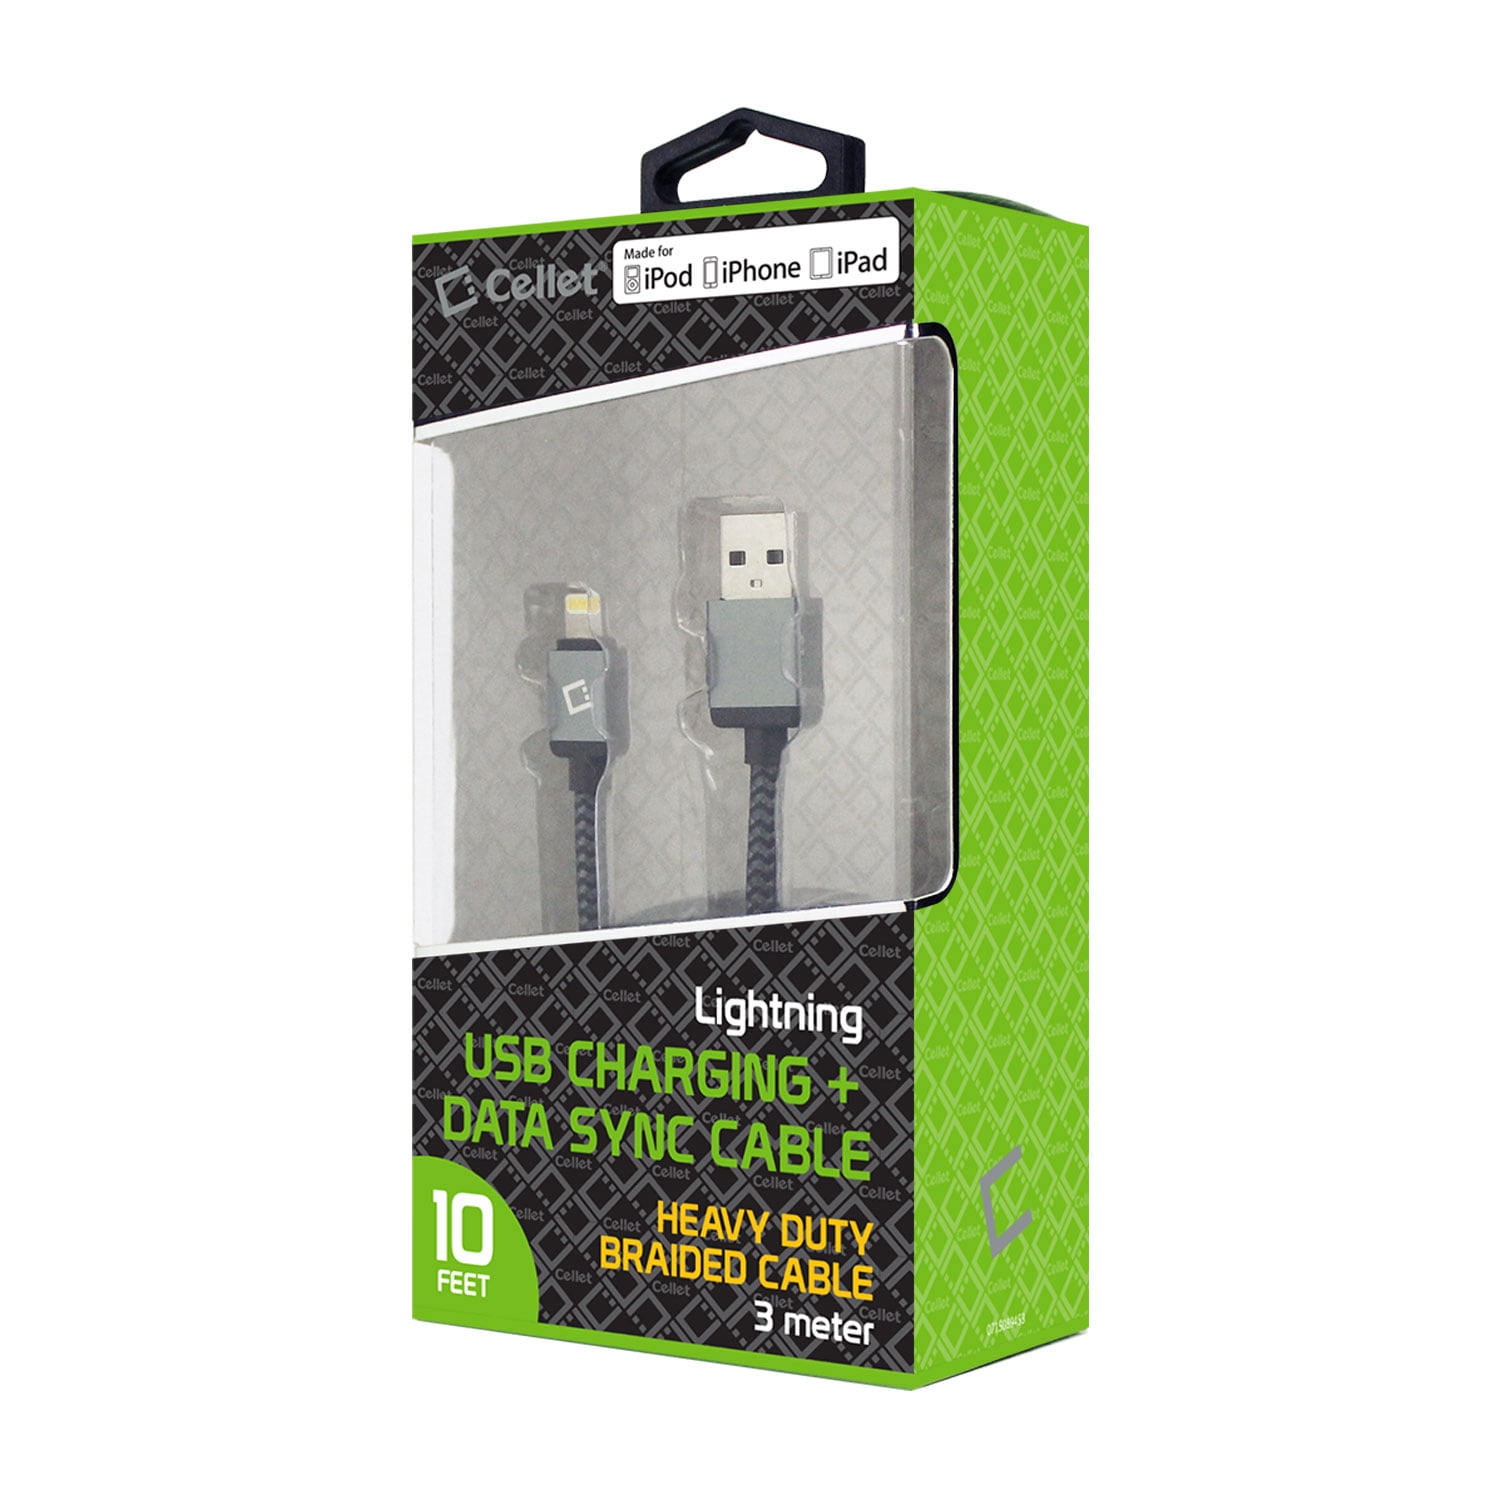 TWO SETs 10  TEN Watt 2.1 AMP Wall Charger for iPad USB and 8 pin sync CABLE 